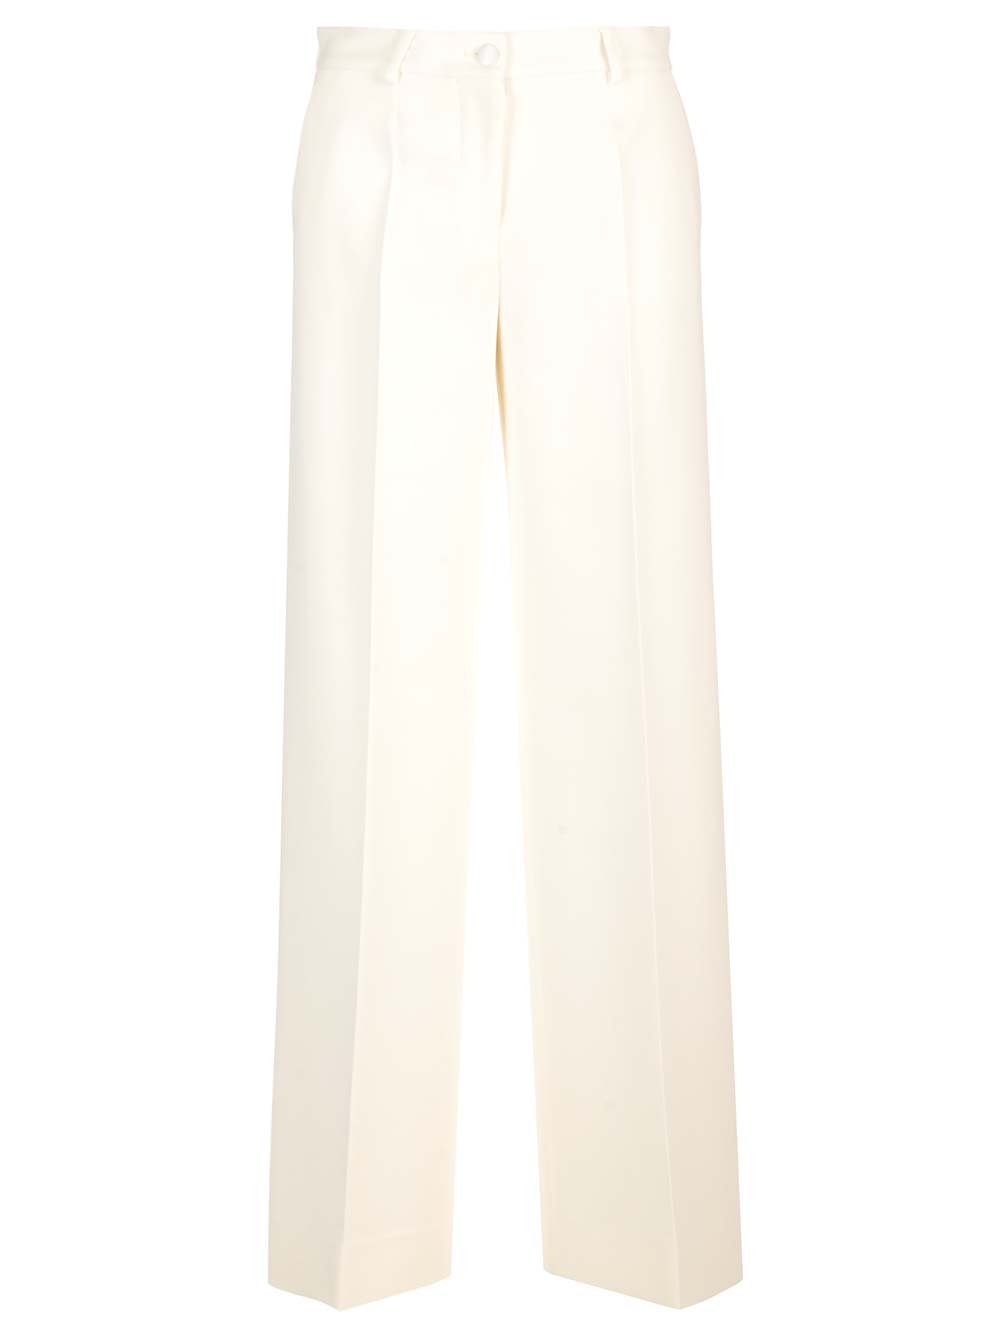 DOLCE & GABBANA FLARED DOUBLE CREPE TROUSERS